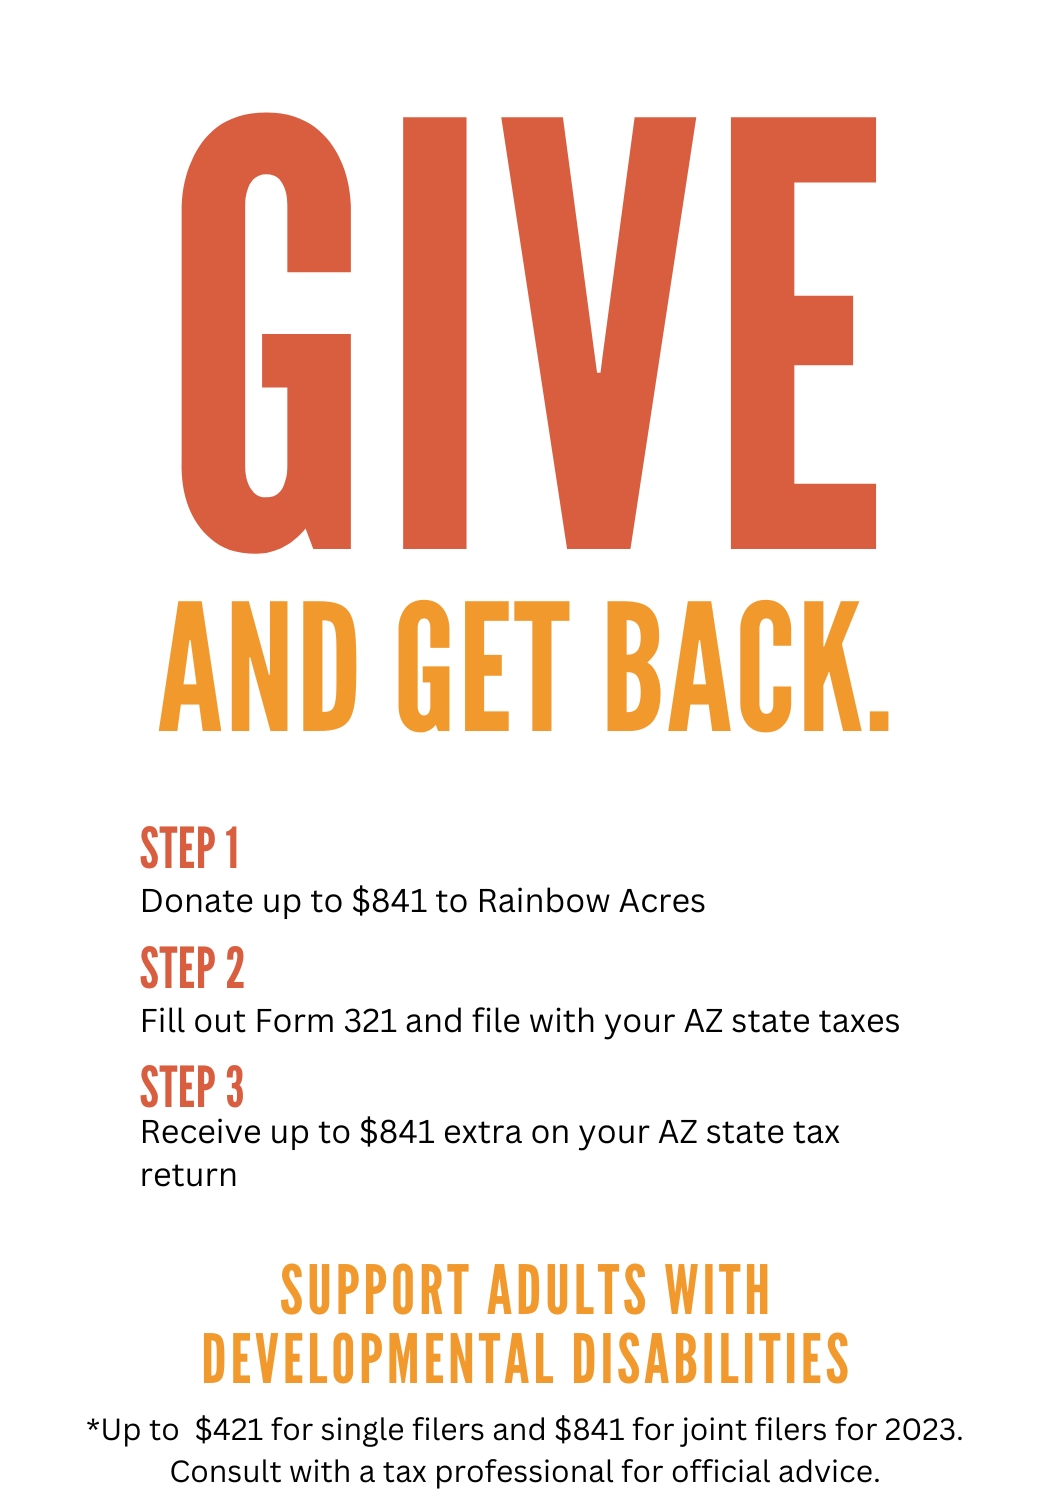 Give and Give Back. Step 1. Donate up to $841 to Rainbow Acres. Step 2. Fill out Form 321 and file with your AZ state taxes. Step 3. Receive up to $841 extra on your AZ state tax return. Support adults with developmental disabilities. *Up to $421 for single filers and $841 for joint filers for 2023. Consult with a tax professional for official advice.